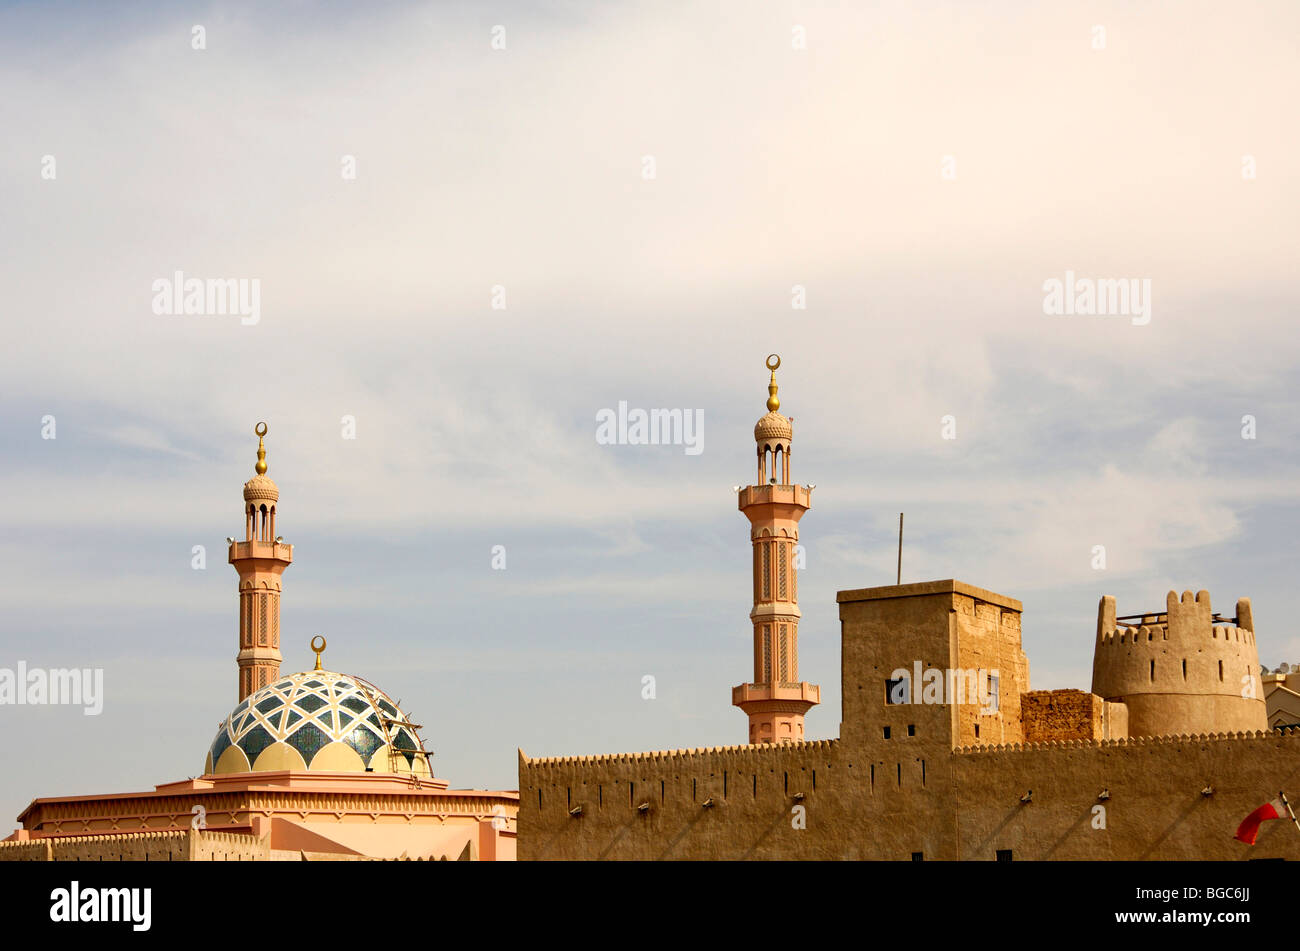 Skyline of a traditional Arab city with minarets and dome of a mosque, Ajman, United Arab Emirates, Middle East Stock Photo